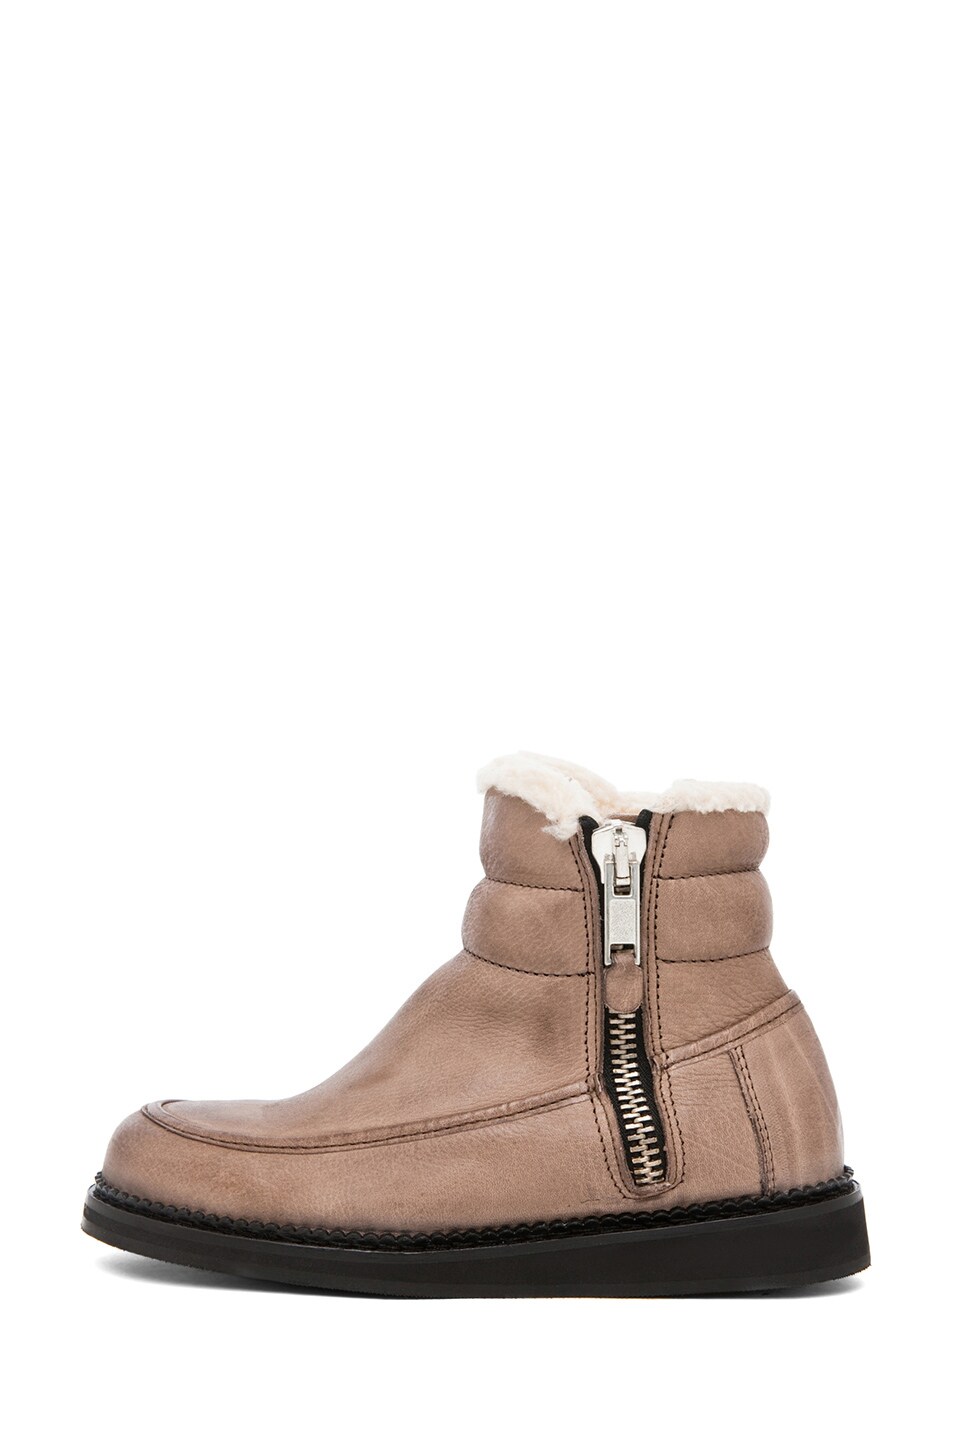 Image 1 of SILENT DAMIR DOMA Saury Boot in Sand